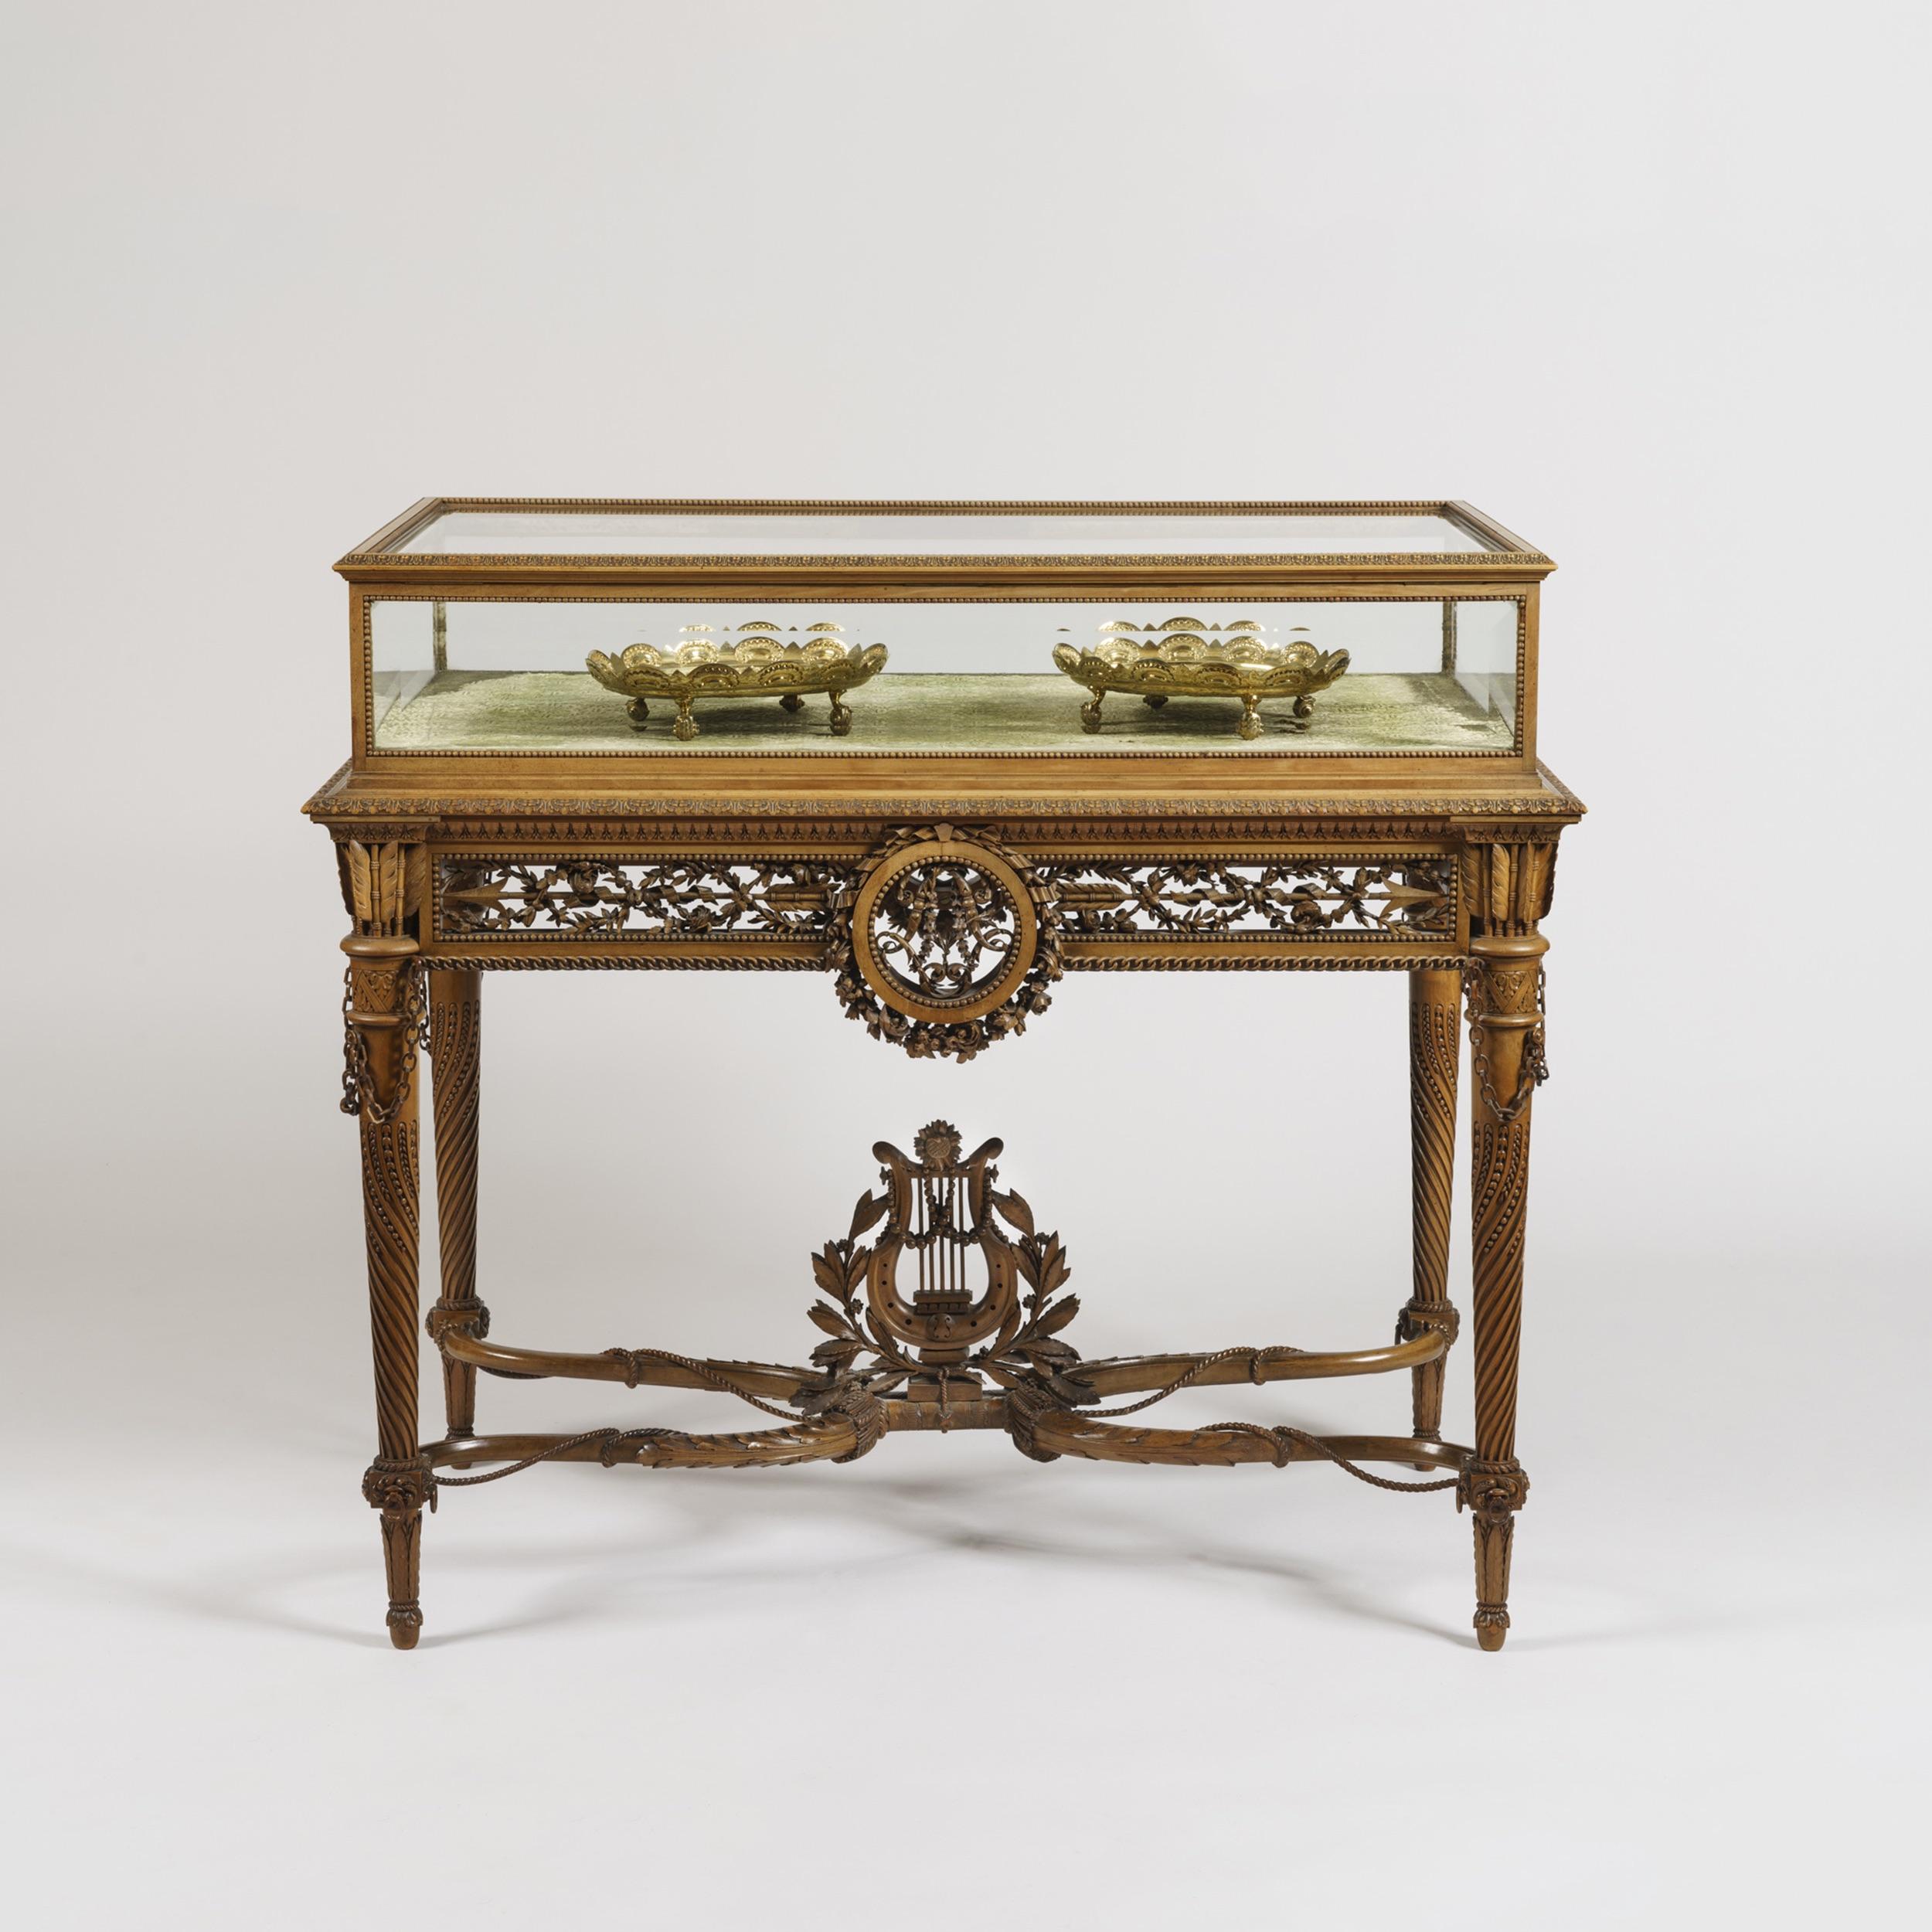 A Tour de Force table Vitrine in the Louis XVI Manner
by Alfred-Emmanuel-Louis Beurdeley, of Paris

Of free-standing form, constructed in a finely patinated fruit wood, adorned with carving of finest Exhibition quality; rising from tapering, turned